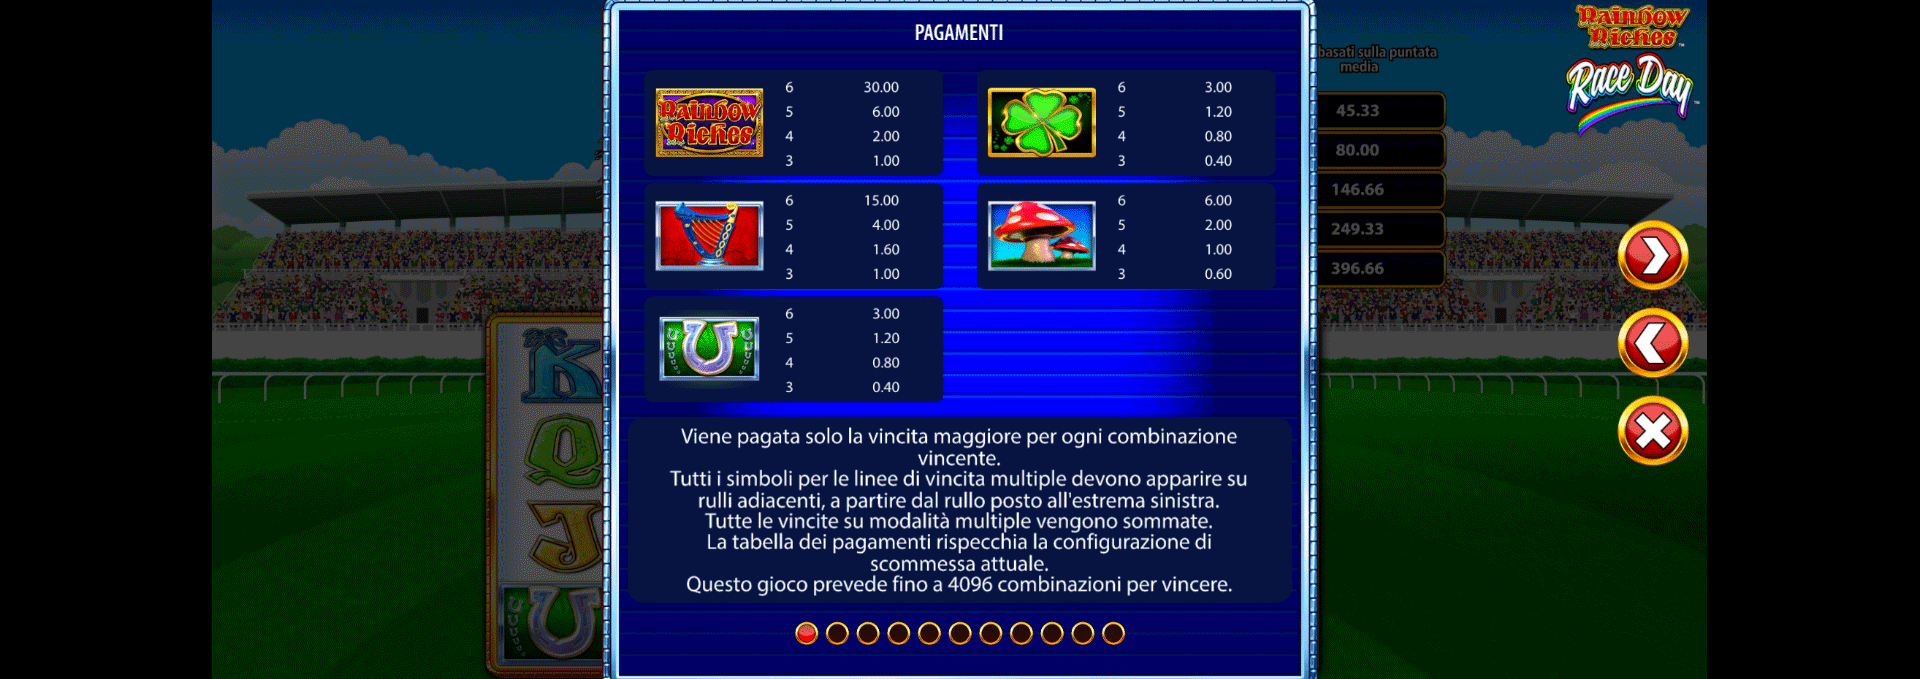 paytable della slot online rainbow riches race day